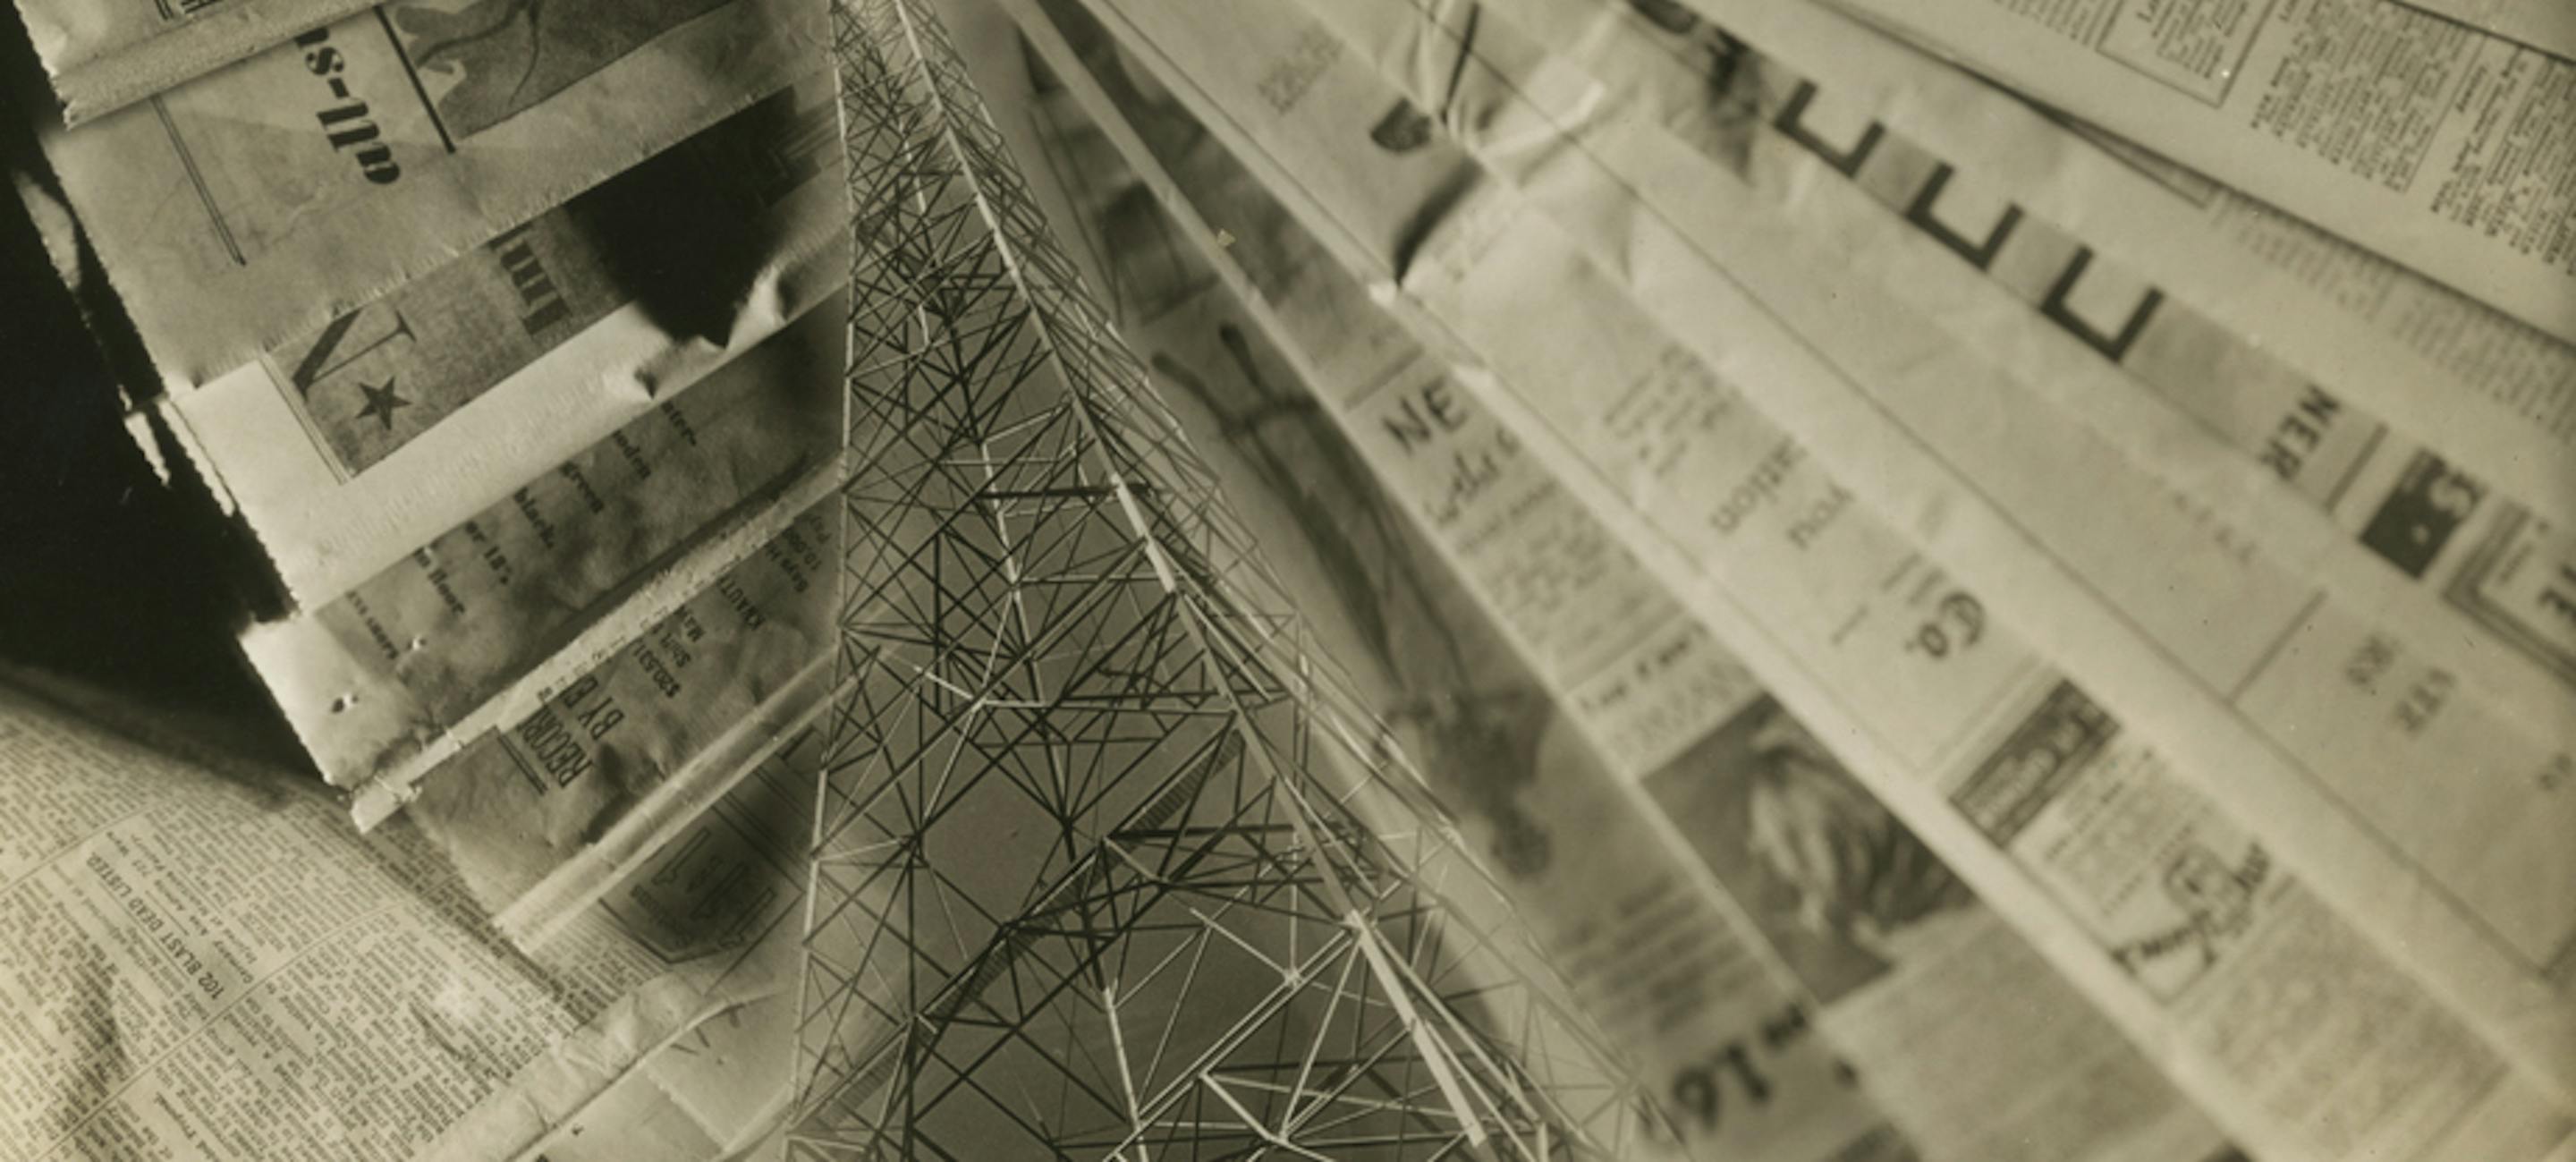 a montage of newspapers and a radio tower in black and white